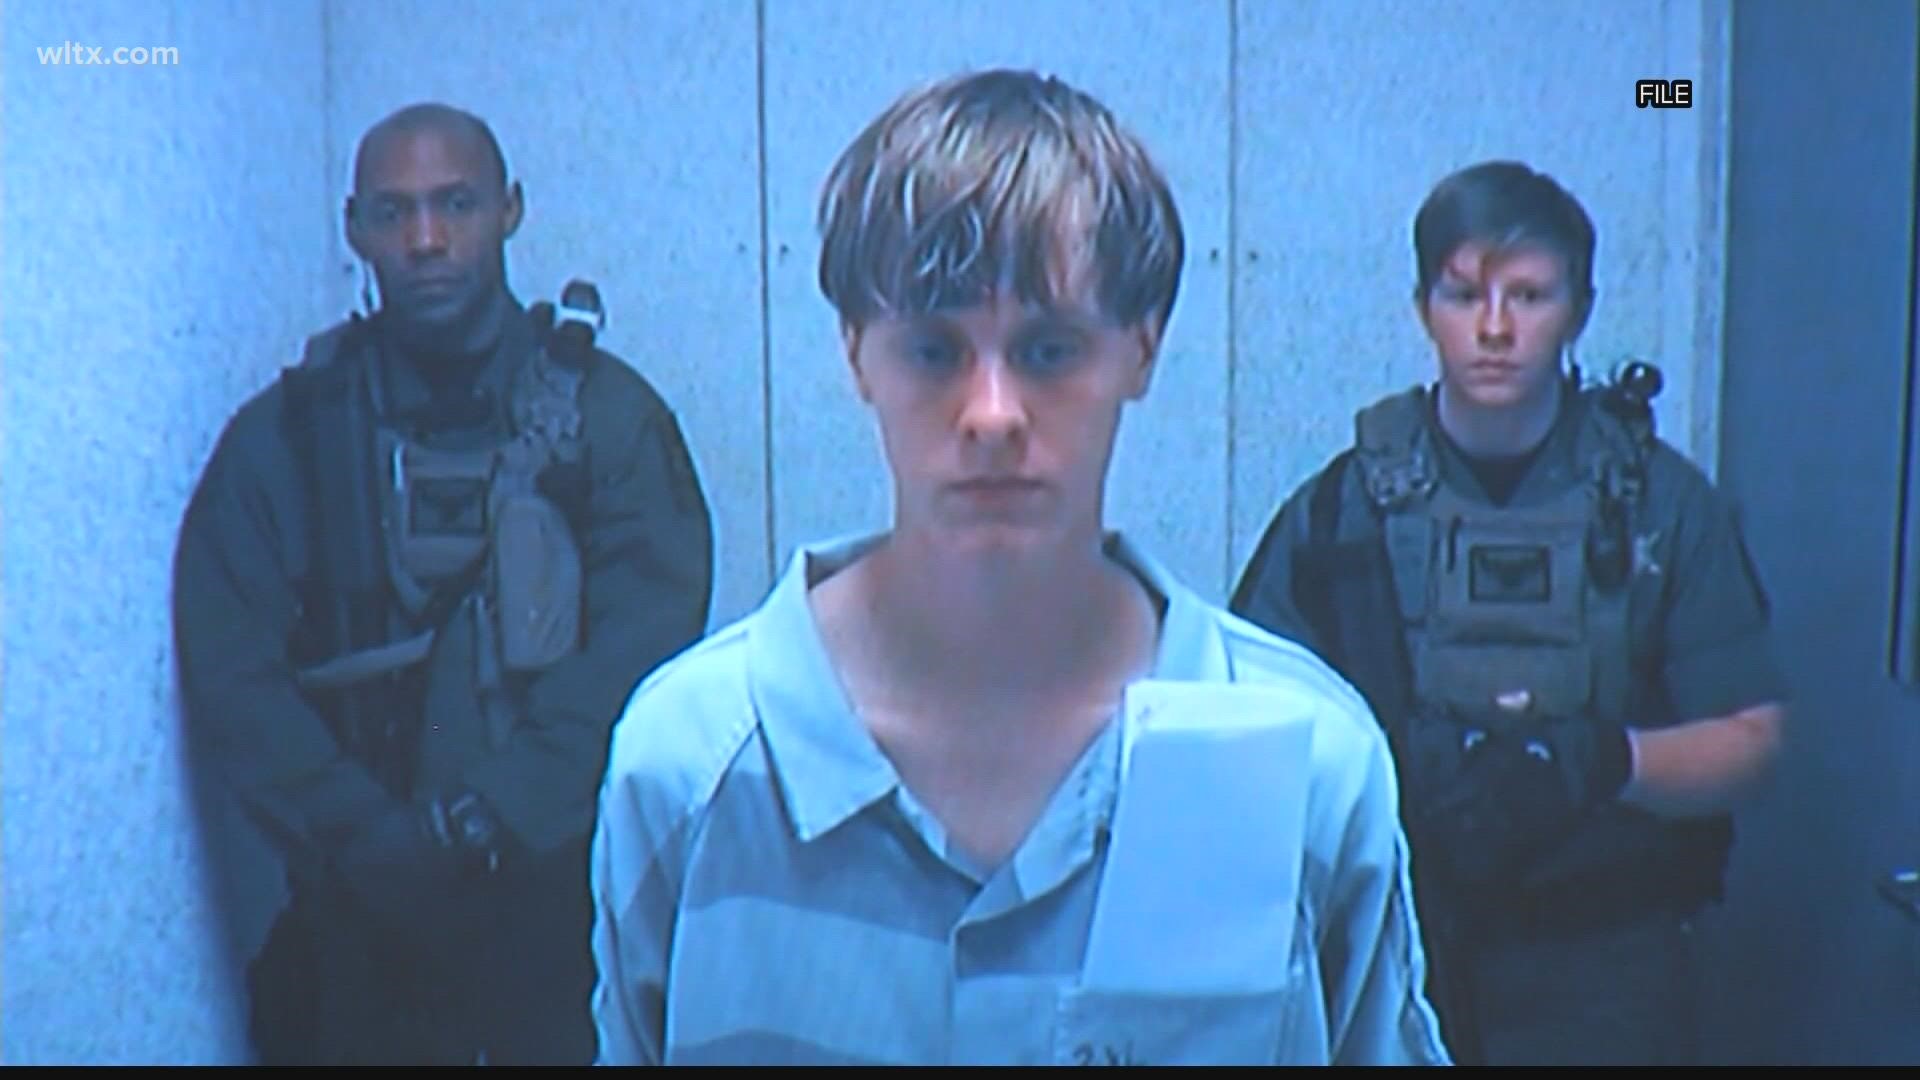 Dylann Roof, now 28, opened fire during the closing prayer of a Bible study at Mother Emanuel AME Church in Charleston, South Carolina, in 2015.